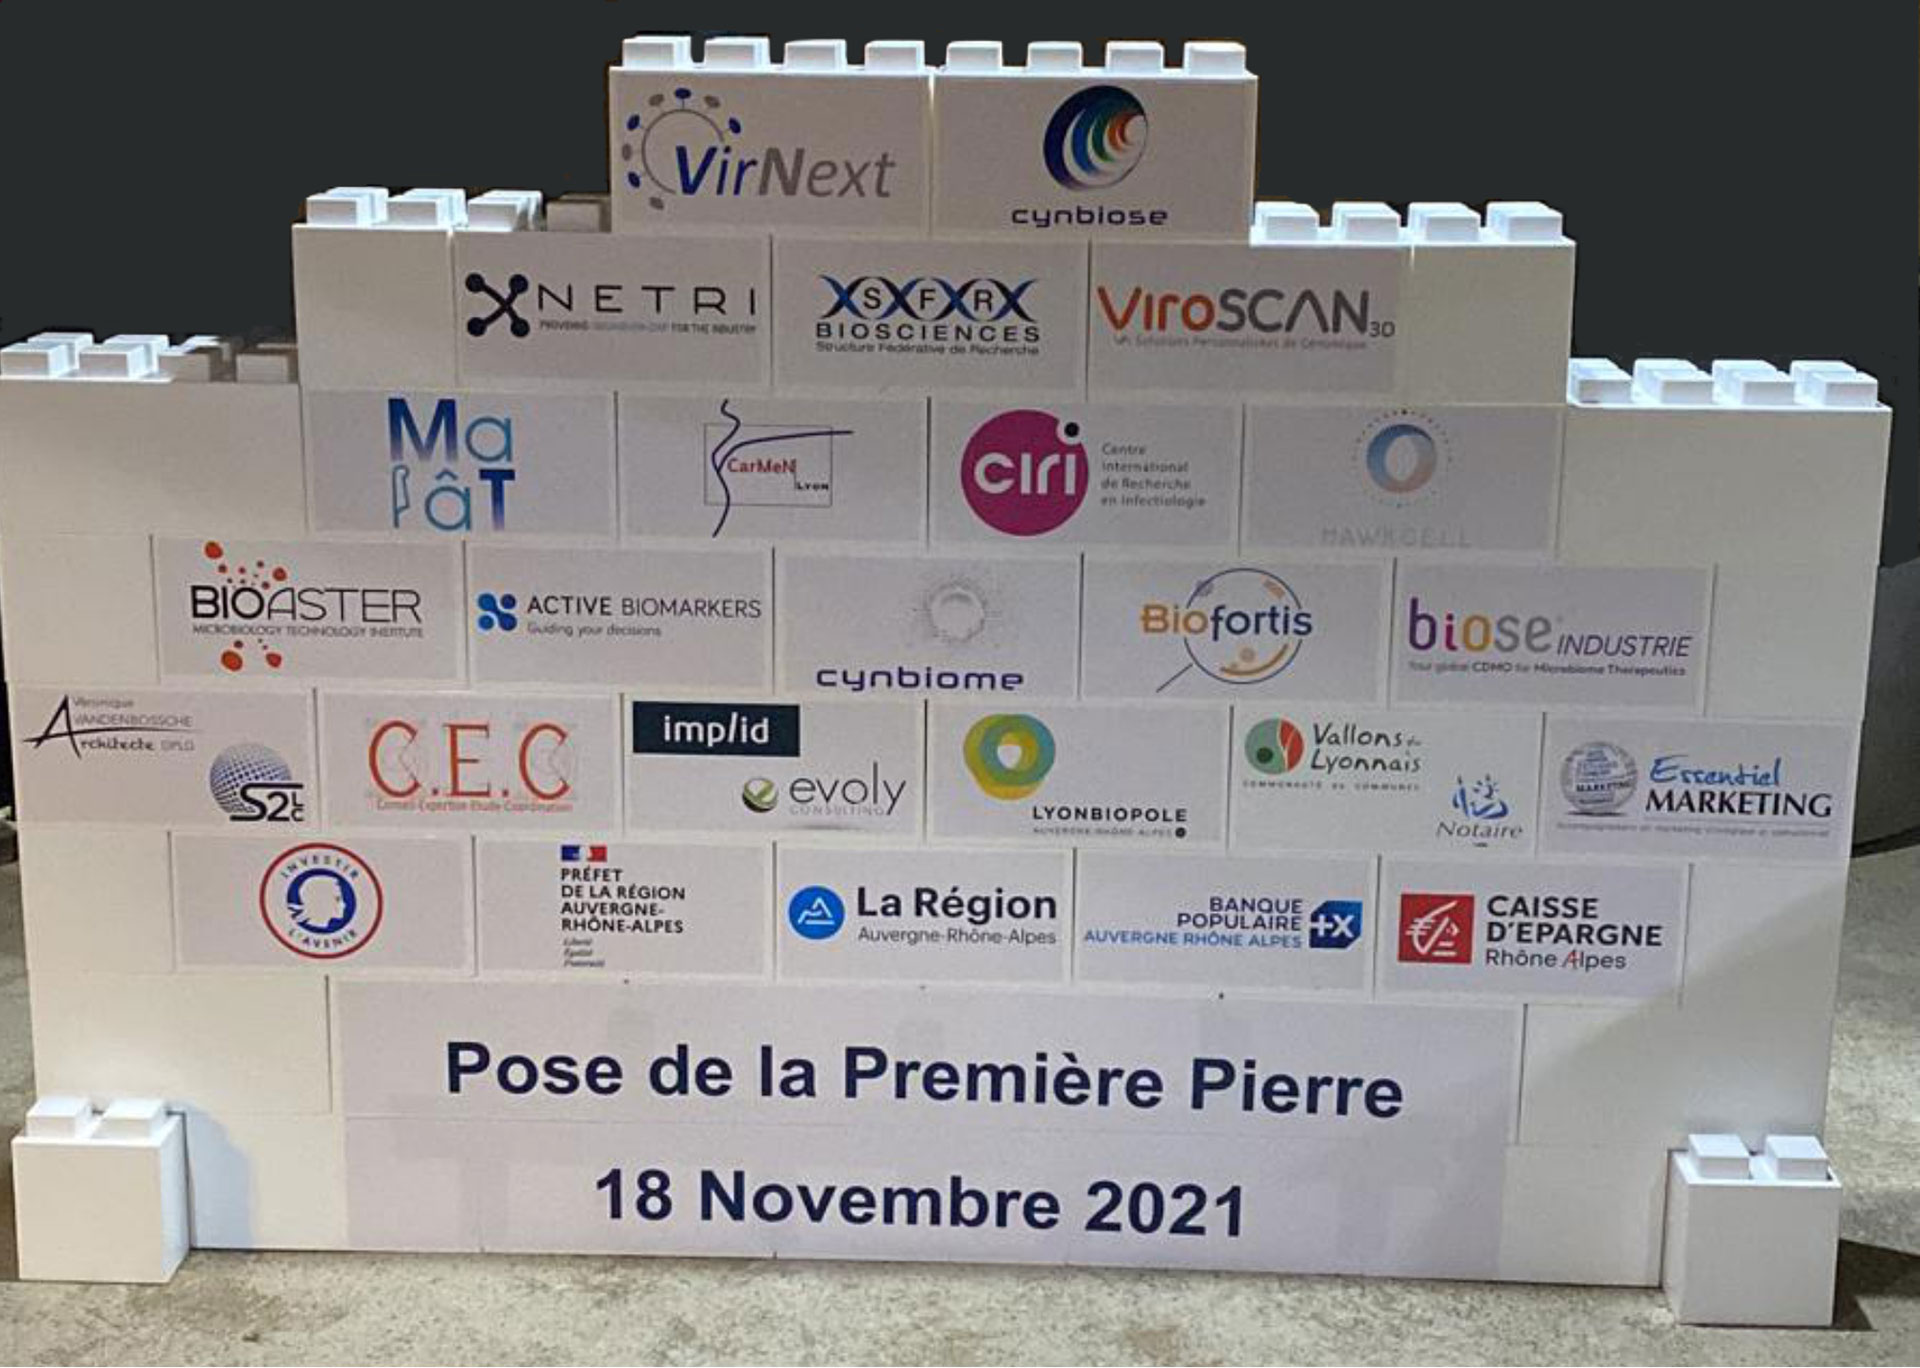 Wall of Cynbiome partners during the groundbreaking ceremony to lay the first stone of Cynbiose’s high-tech facility, on 18 November 2021 in the Lyon area